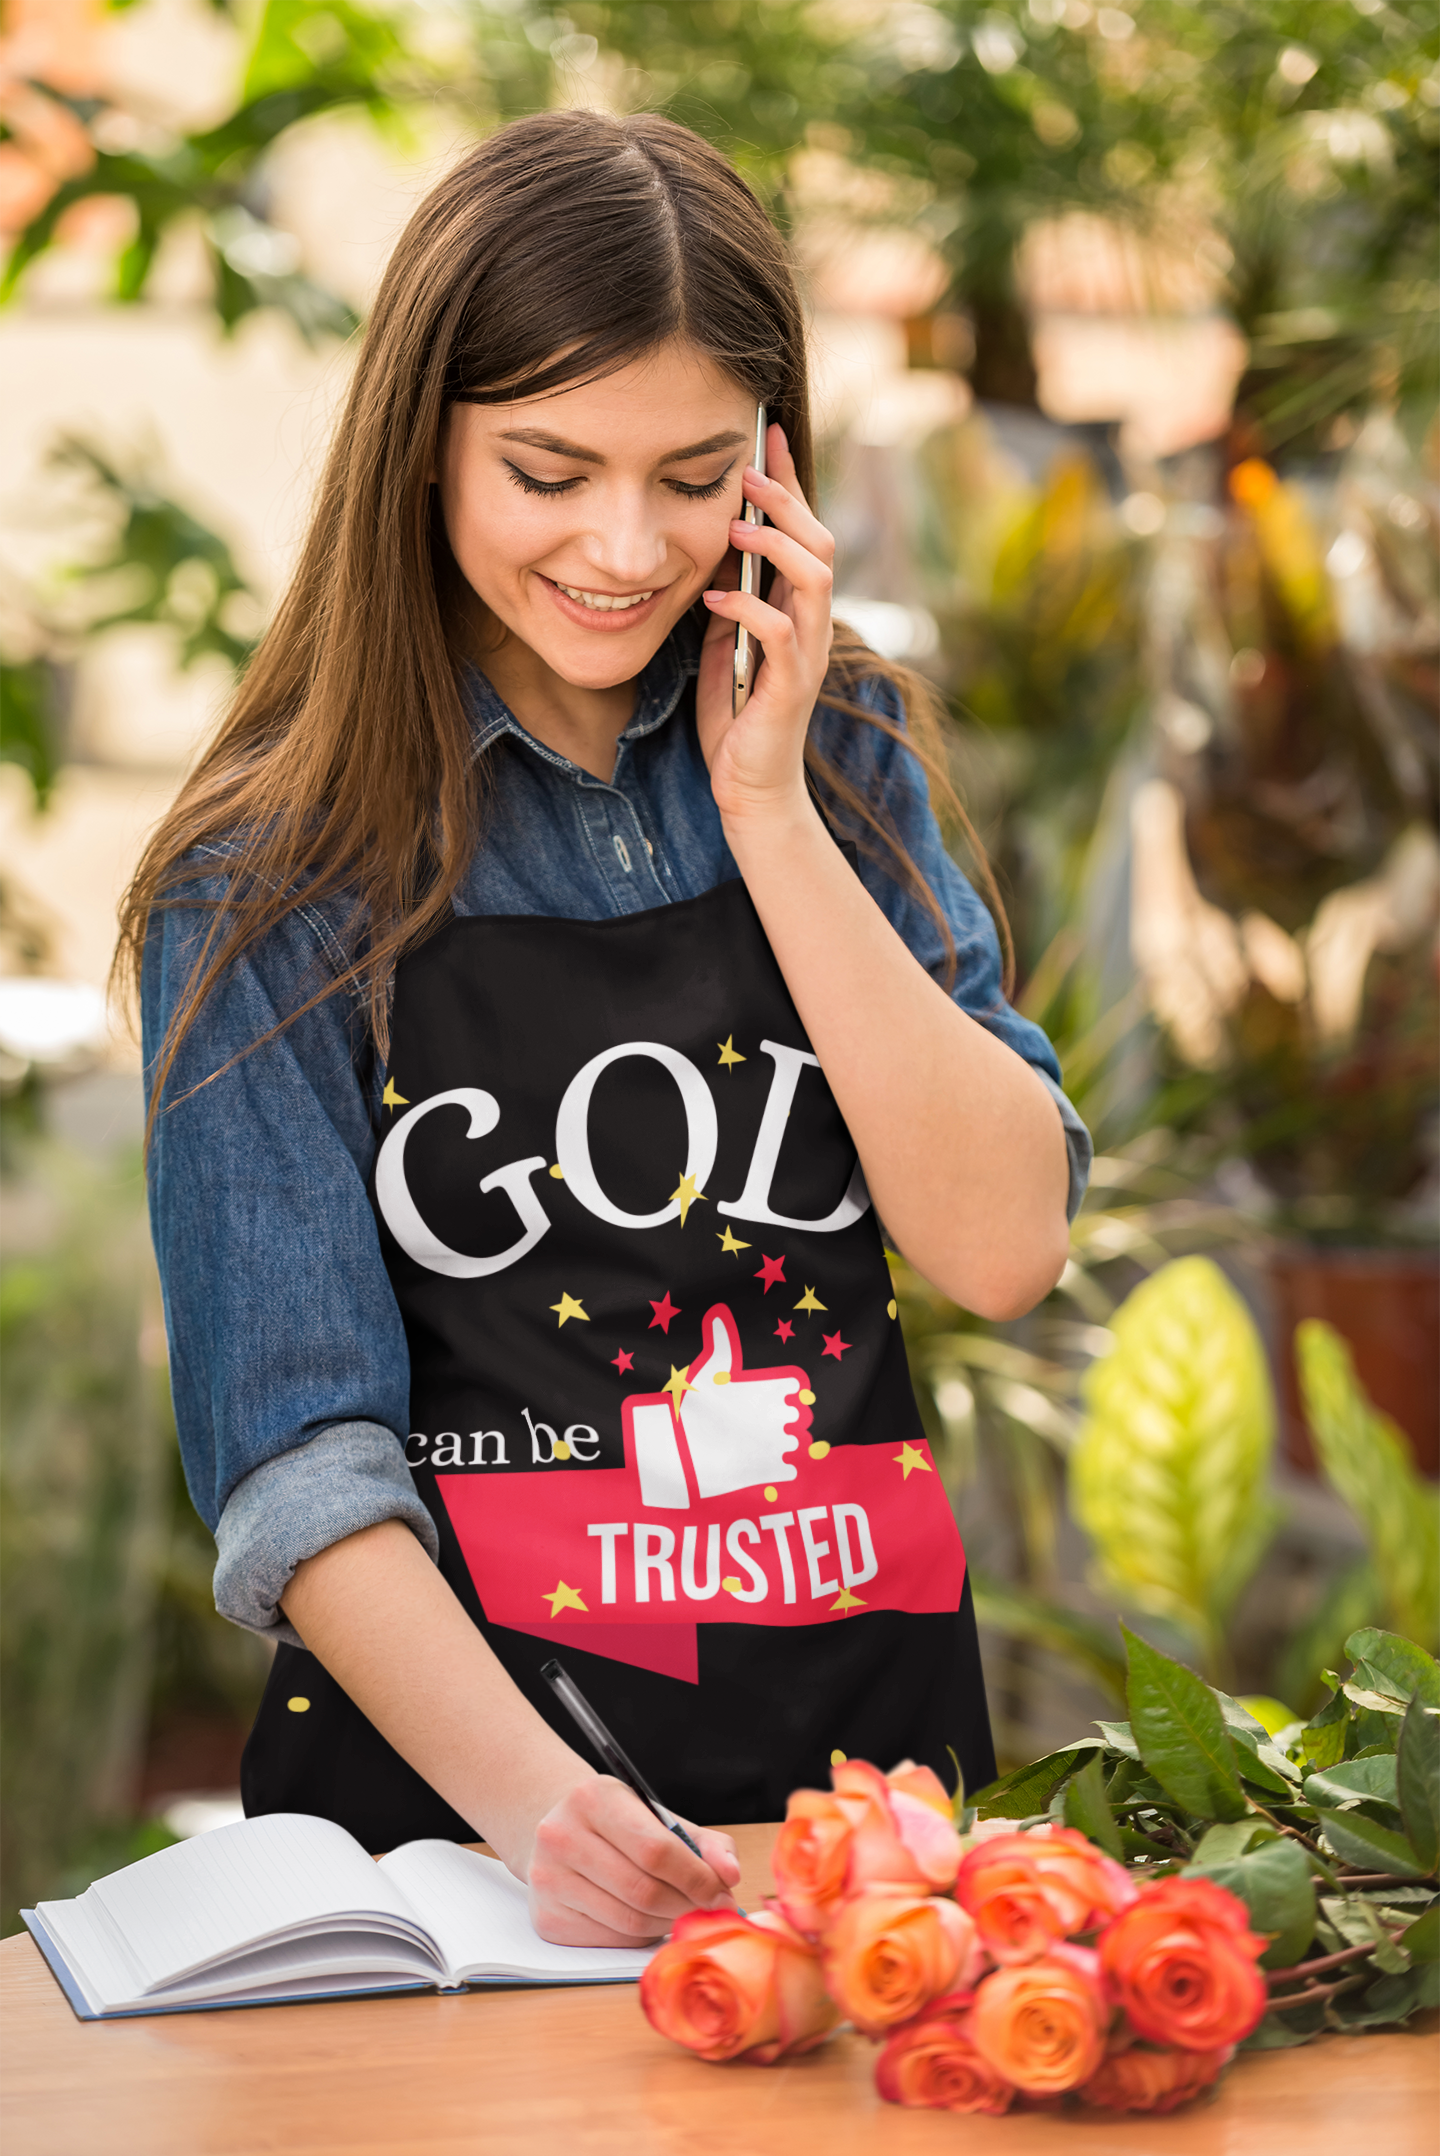 God Can Be Trusted Motivational Apron - Motivational Treats